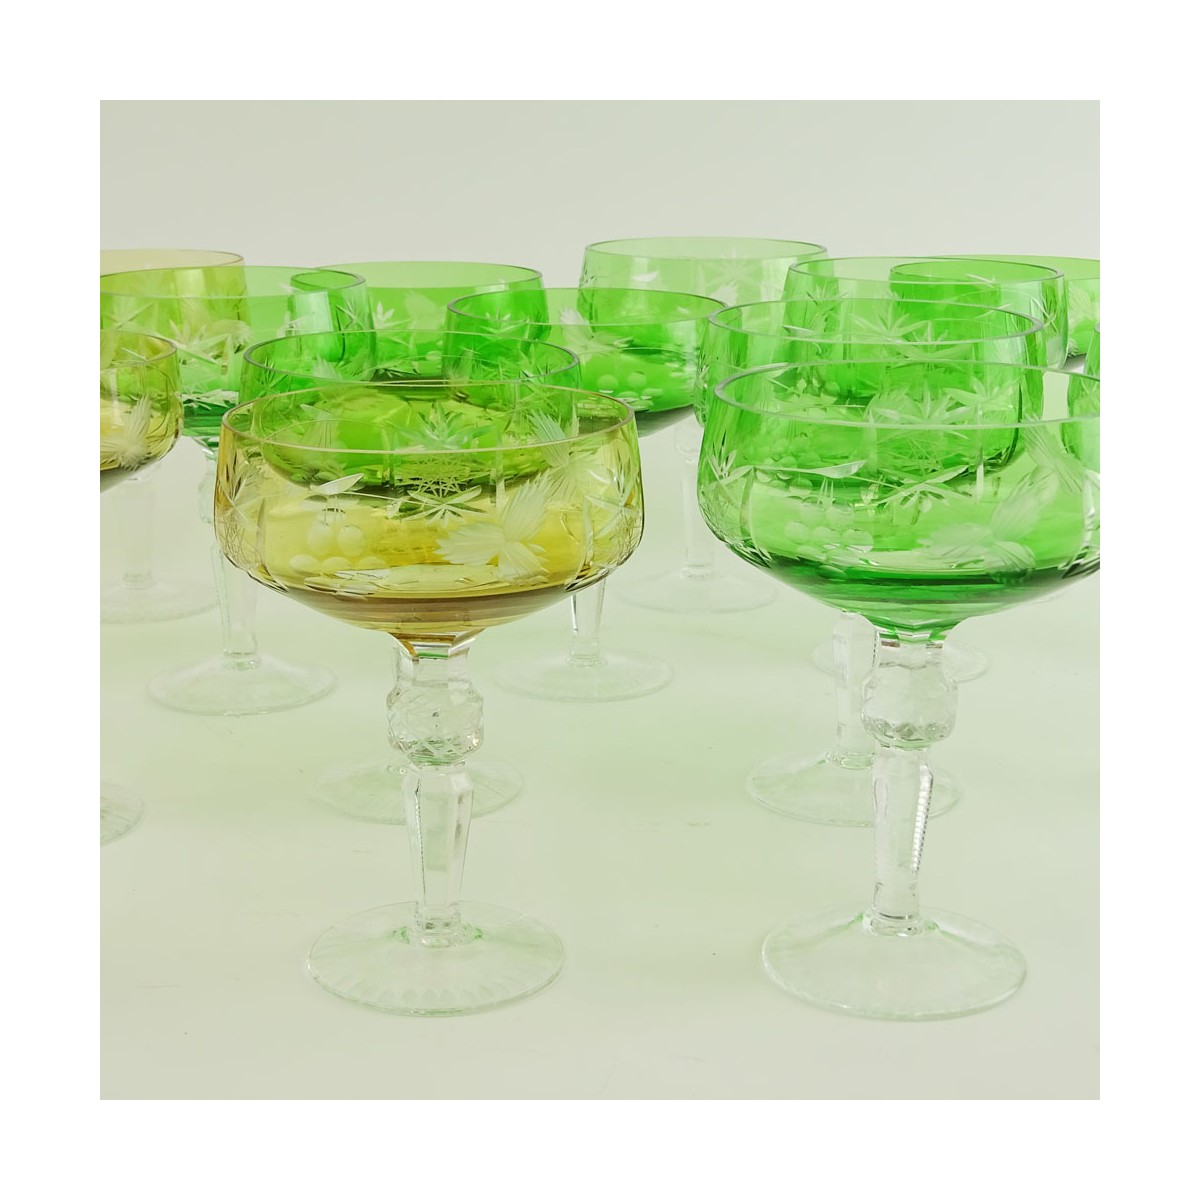 Lot of 17 Bohemian Cut Glass Champagne Coupes in Green (12) and Amber (5). Measure 5-5/8". Very goo